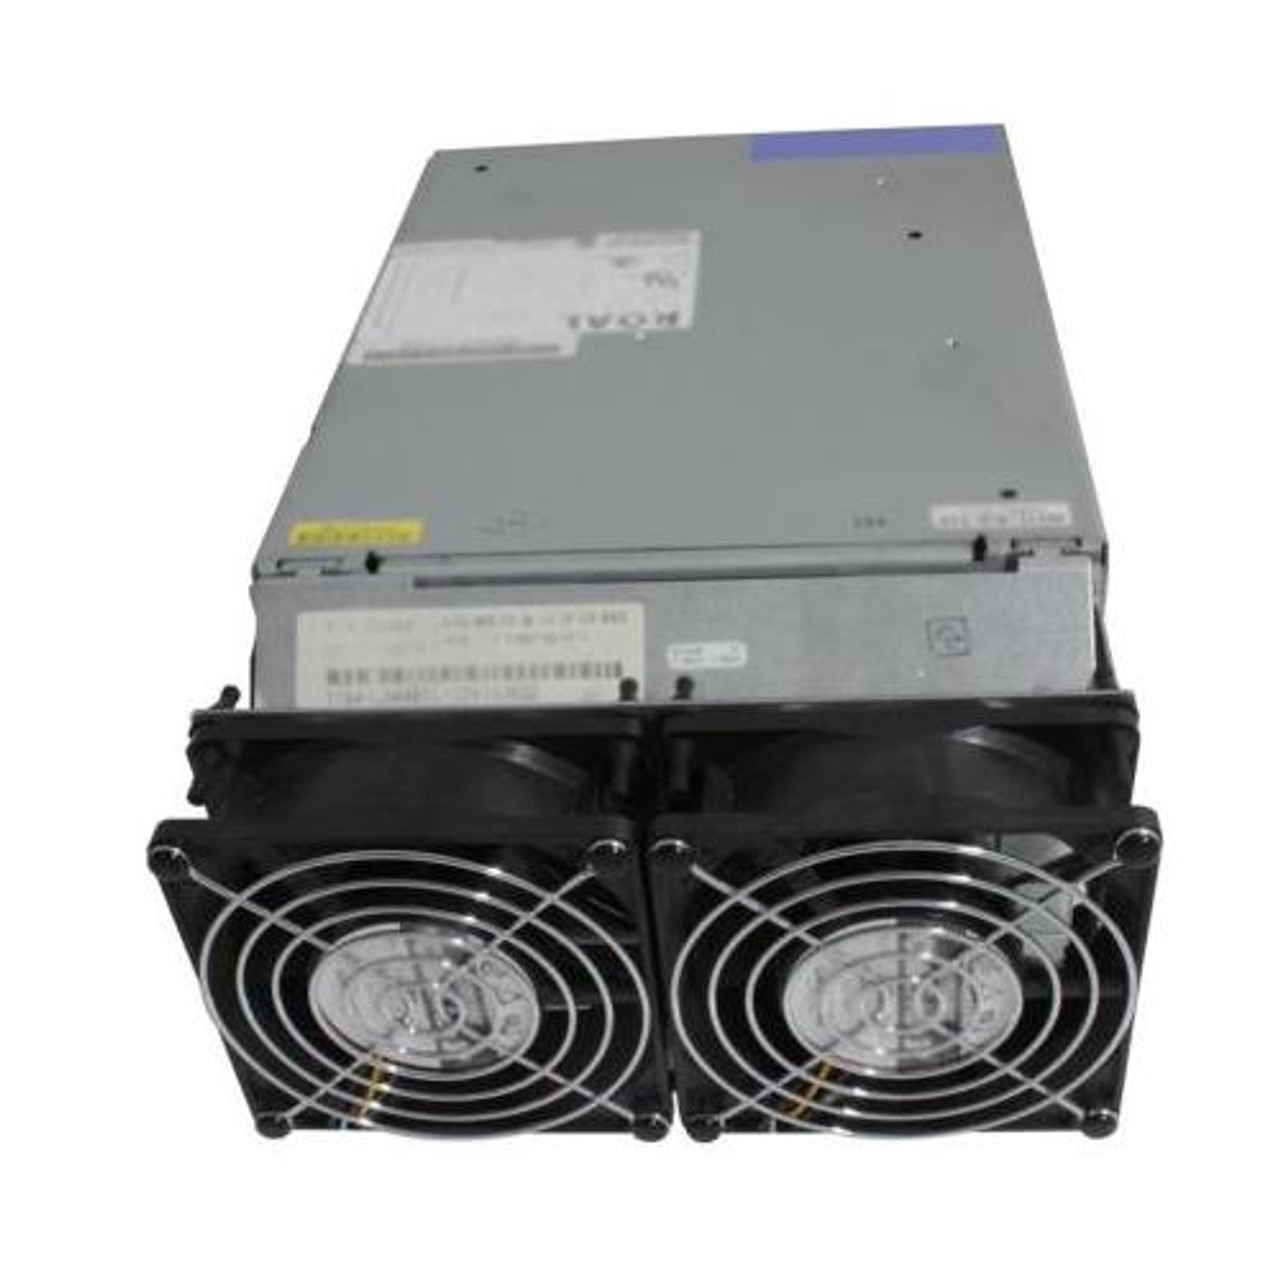 08L0585 IBM 522-Watts Power Supply for RS6000